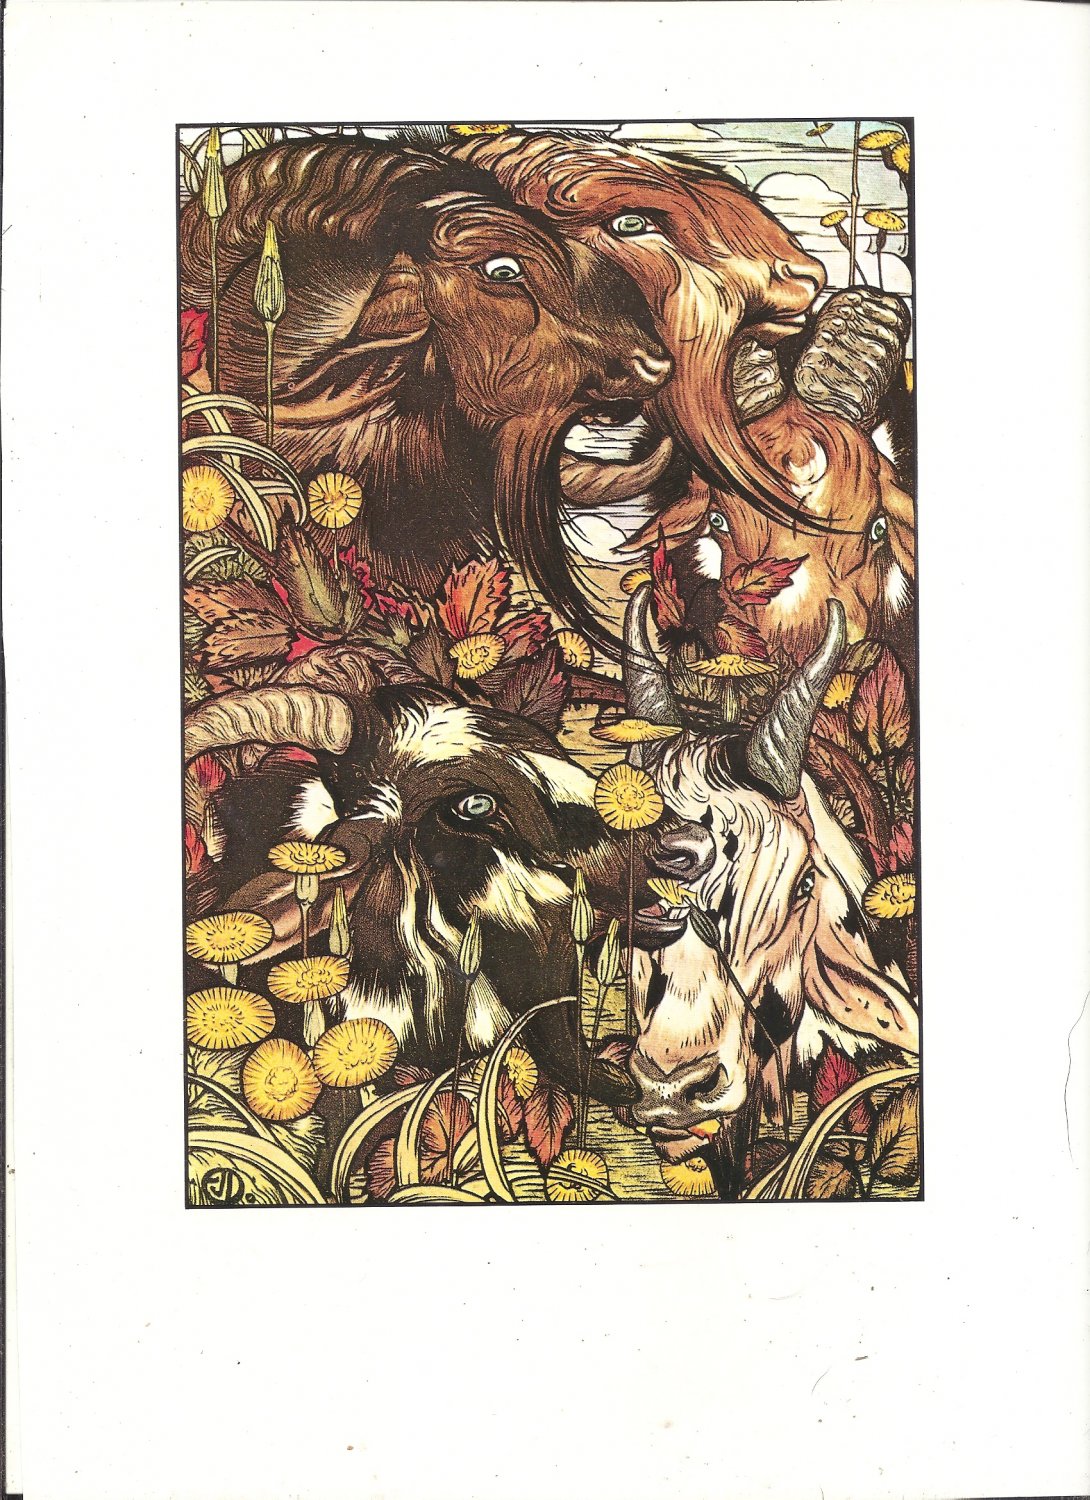 Edward Detmold: Fable's of Aesop - She-Goats & Their Beards - 11.75" x 8.75" Book Page Print